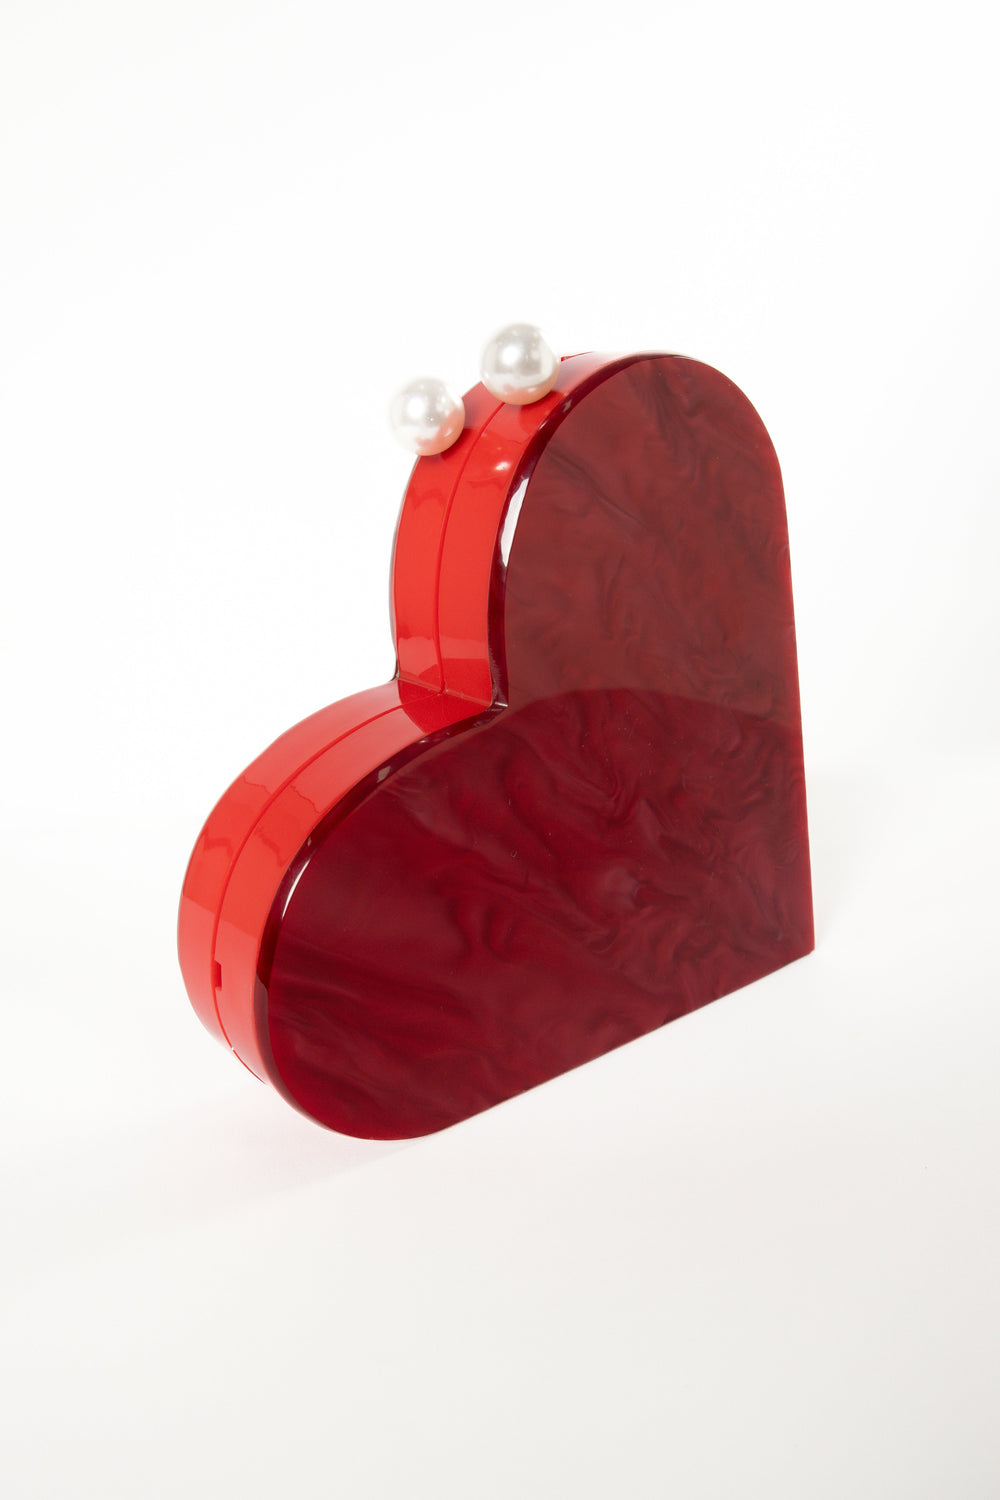 ACCESSORIES Heart Shaped Bag - Red